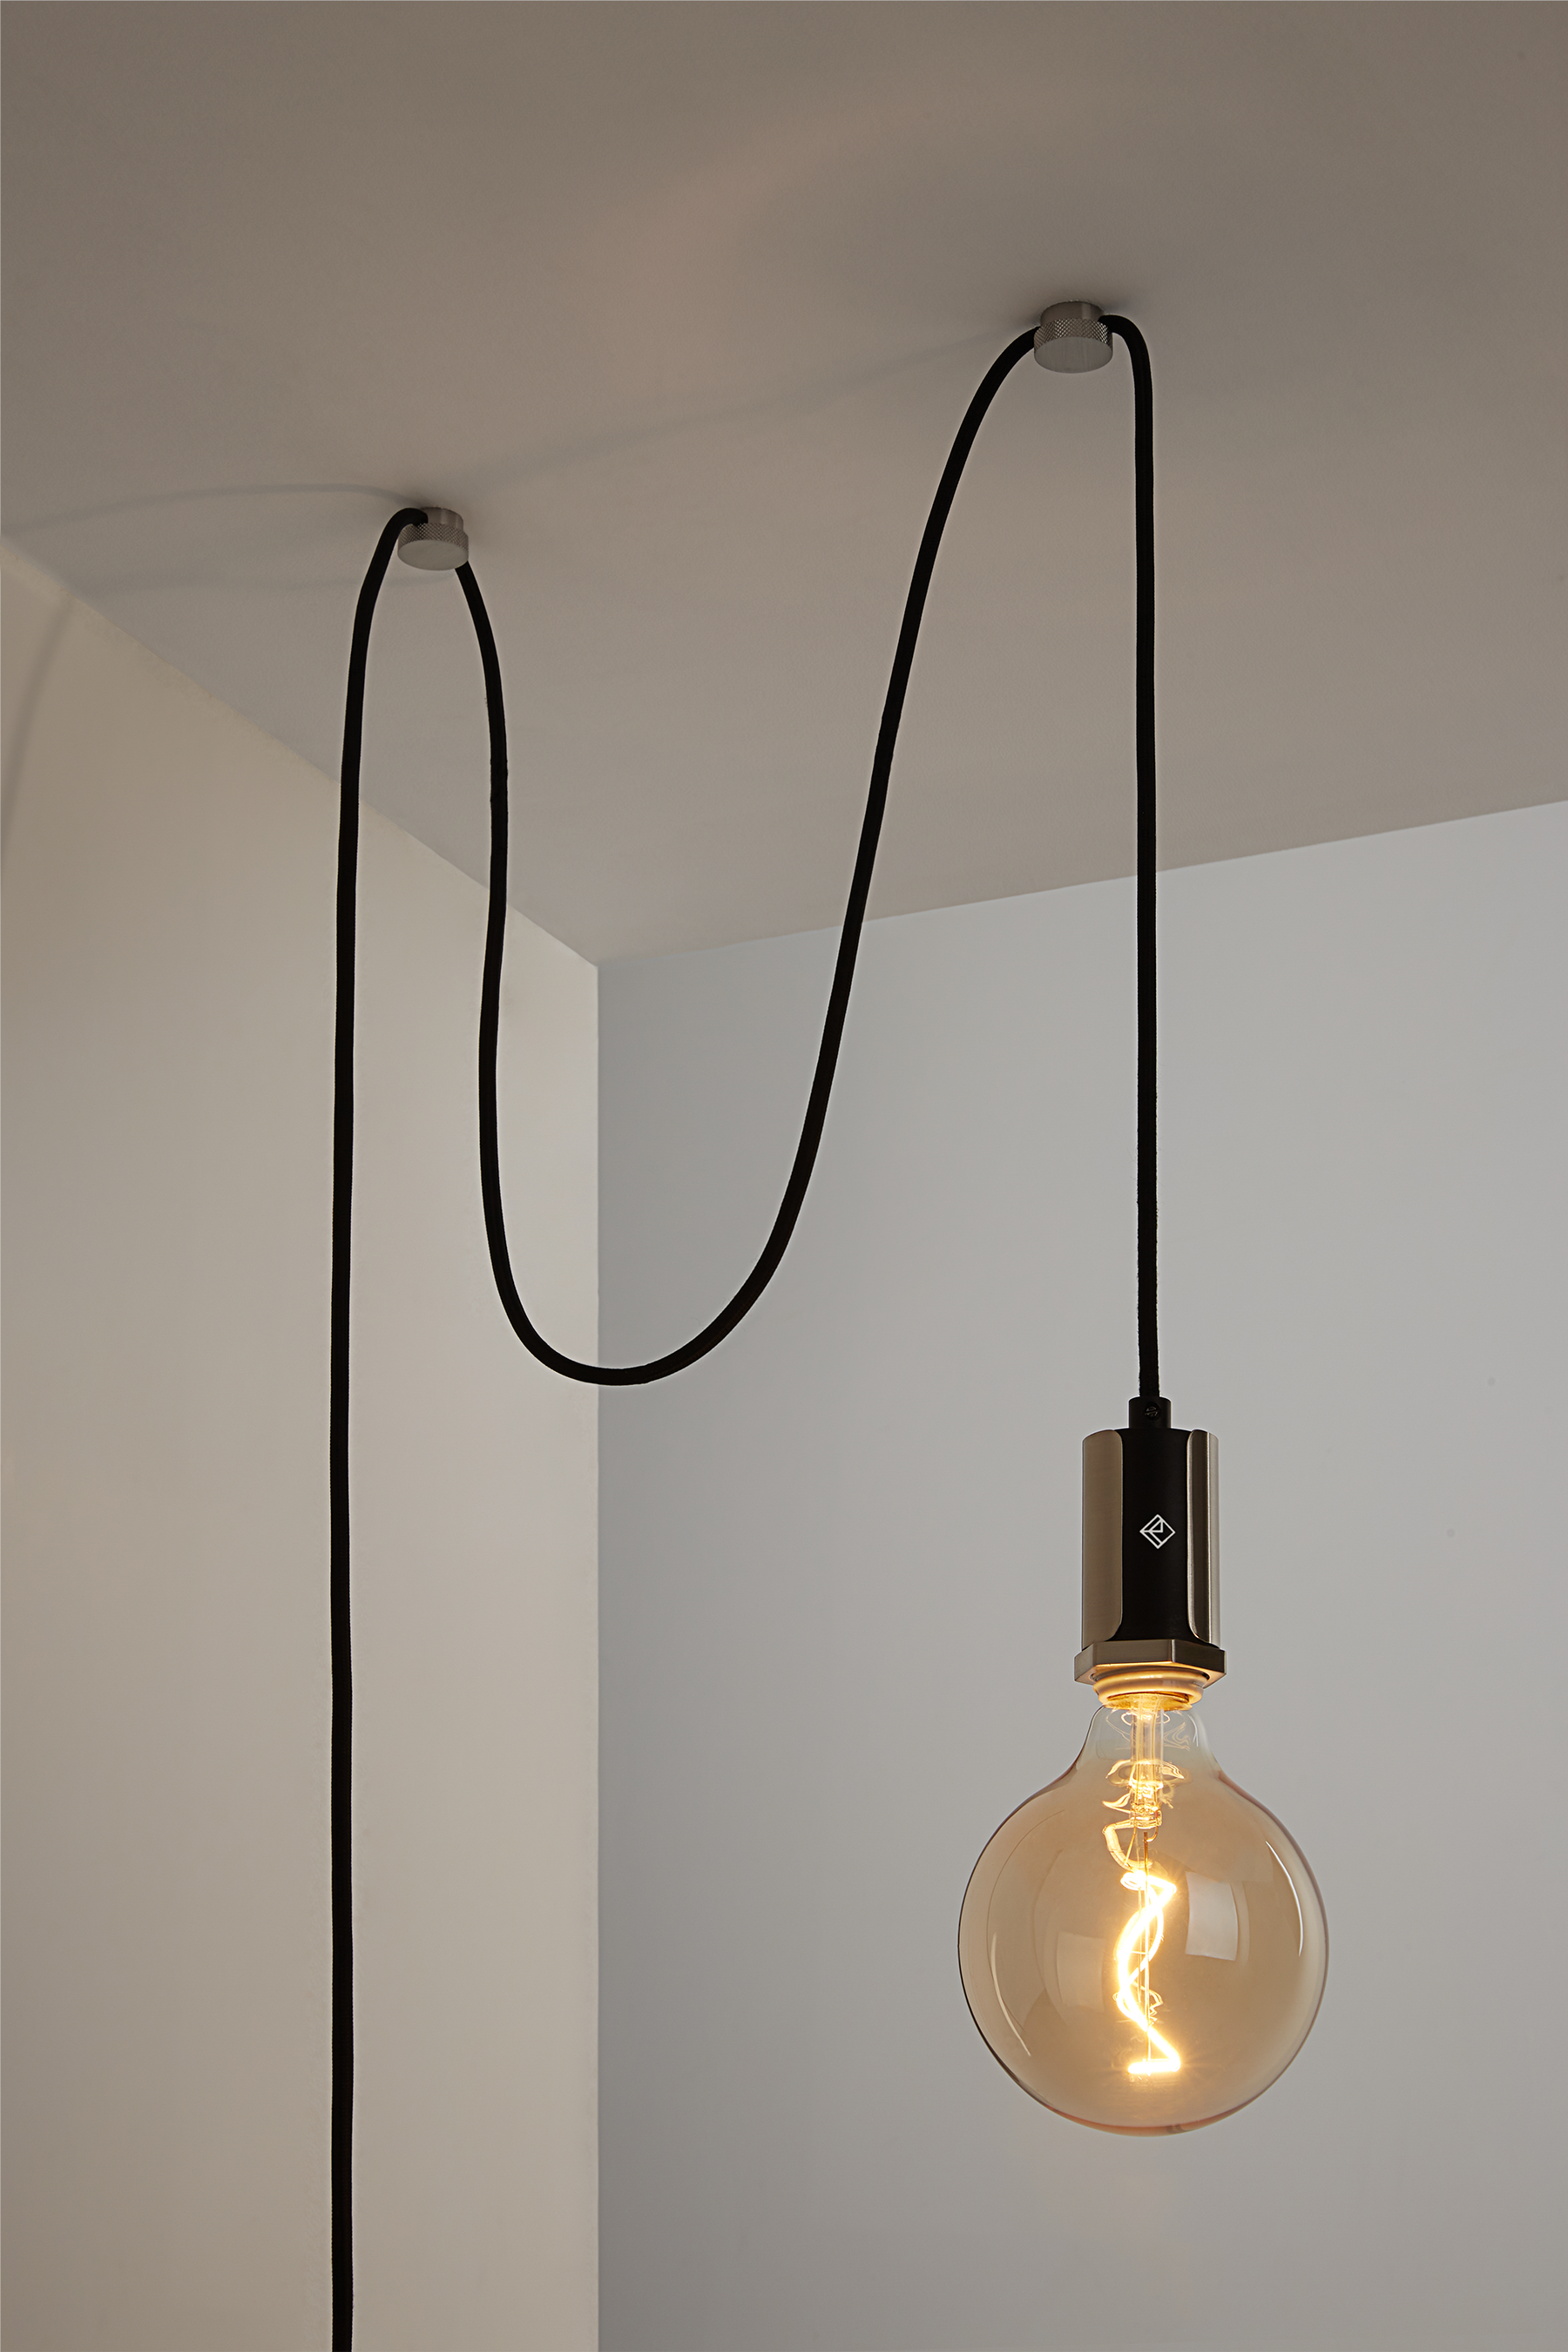 The Alamere Plug-In Pendant is the ideal ceiling pendant lamp for any space. Easy to install, it plugs into any standard wall outlet and comes with two cord anchors to hang it anywhere. An inline dimmer on the cord allows for adjustability with any compatible dimming light bulb.